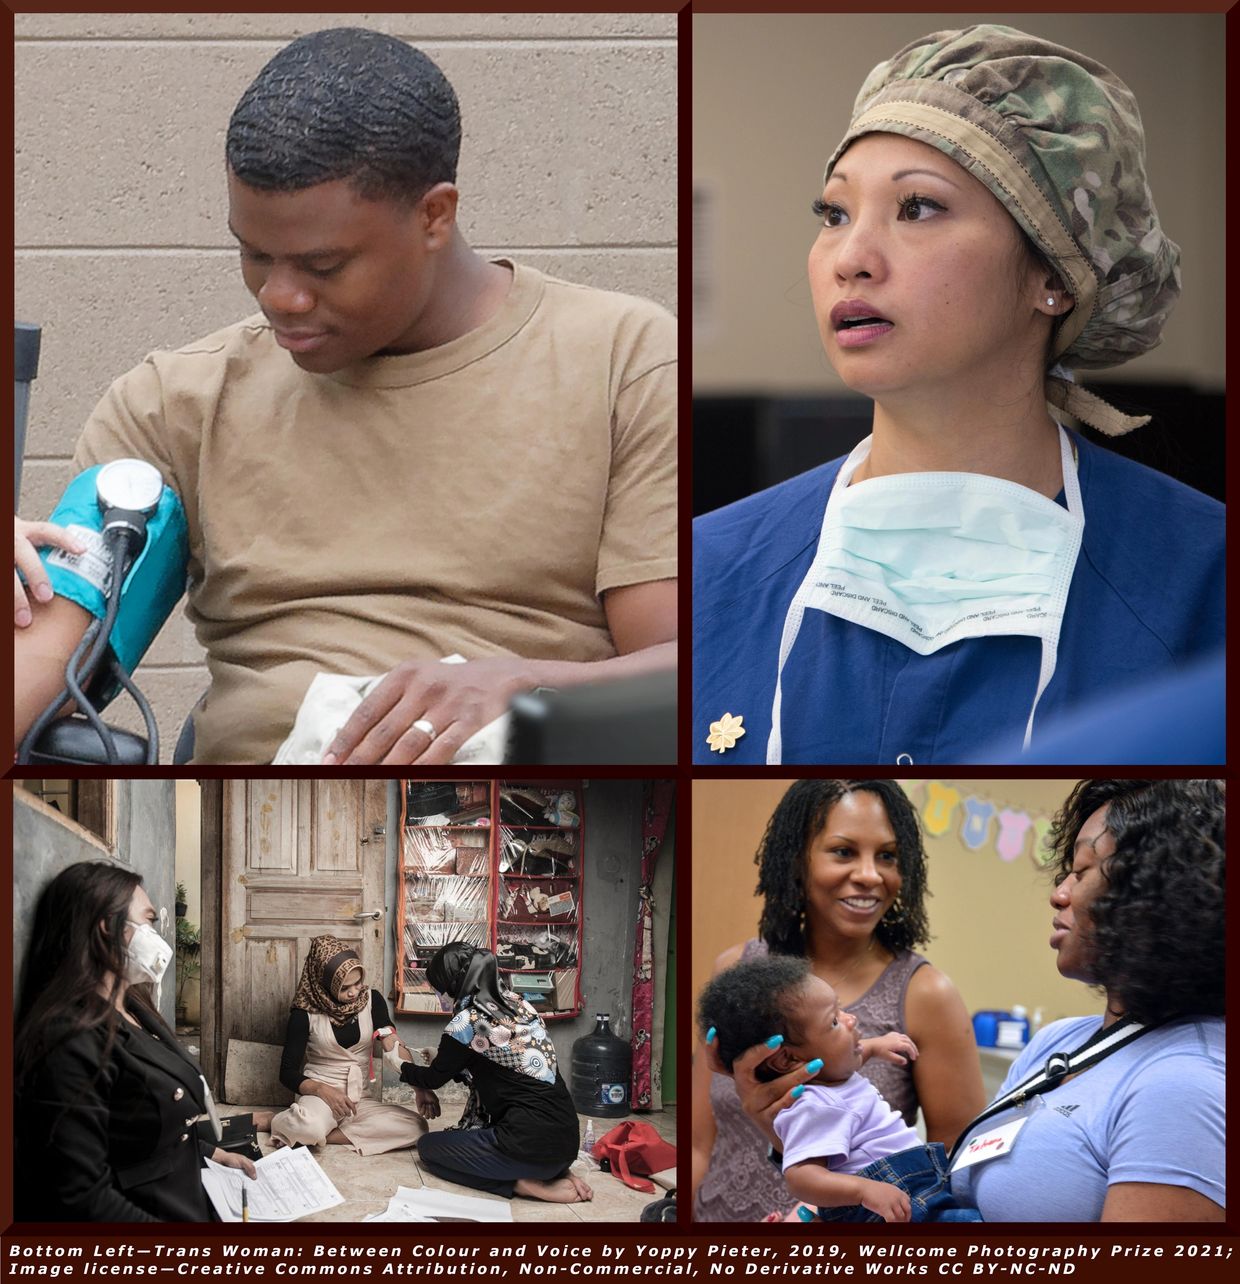 Collage; b.p. measured, surgeon, mother and baby daughter meet nurse, trans woman recv medical care